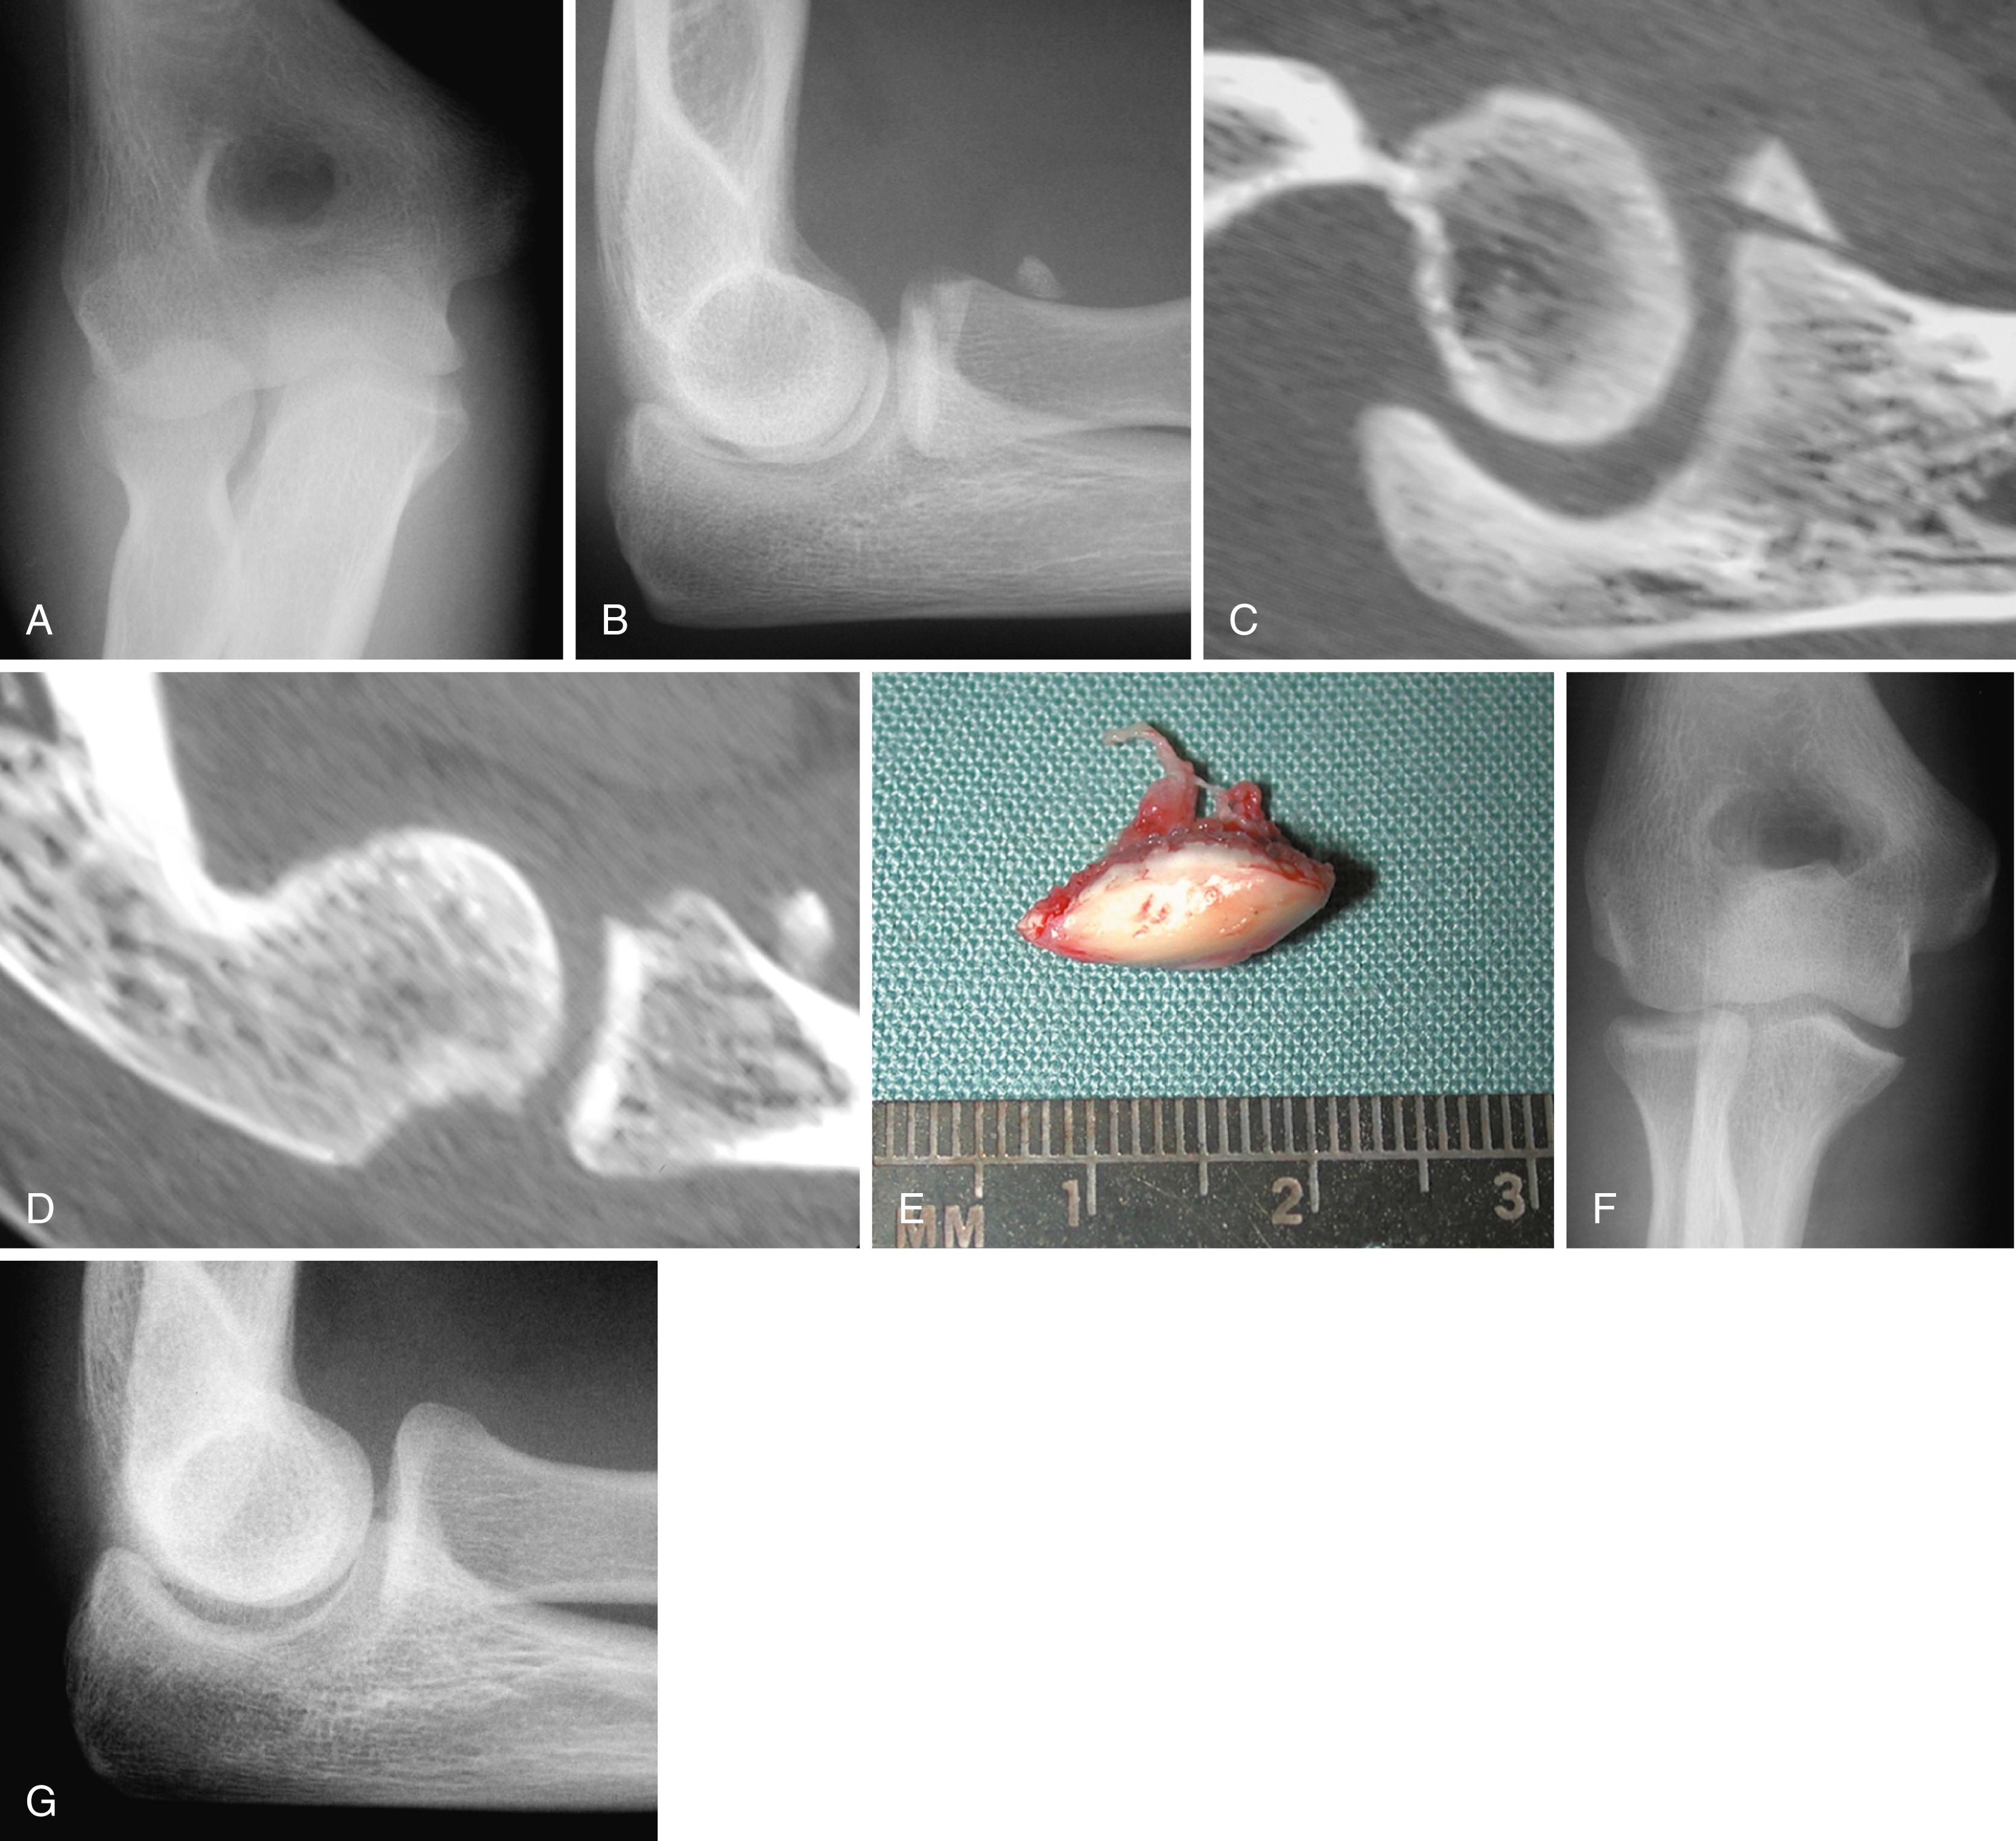 Fig. 19.16, Excision of a fragment of the radial head. Anteroposterior (A) and lateral (B) radiographs of a 32-year-old man who fell while rollerblading; he had limited prosupination. C and D, CT scan demonstrated a nondisplaced coronoid fracture, a posterior capitellum impression fracture, and a fragment of the radial head anterior to the radial neck. E, Attempts to retrieve the fragment arthroscopically failed due to its location distal to the radial head, and an arthrotomy was needed to excise the small fragment. F and G, After a lateral ligament repair and early range-of-motion exercises, the patient recovered a full arc of forearm rotation and a functional arc of elbow motion.